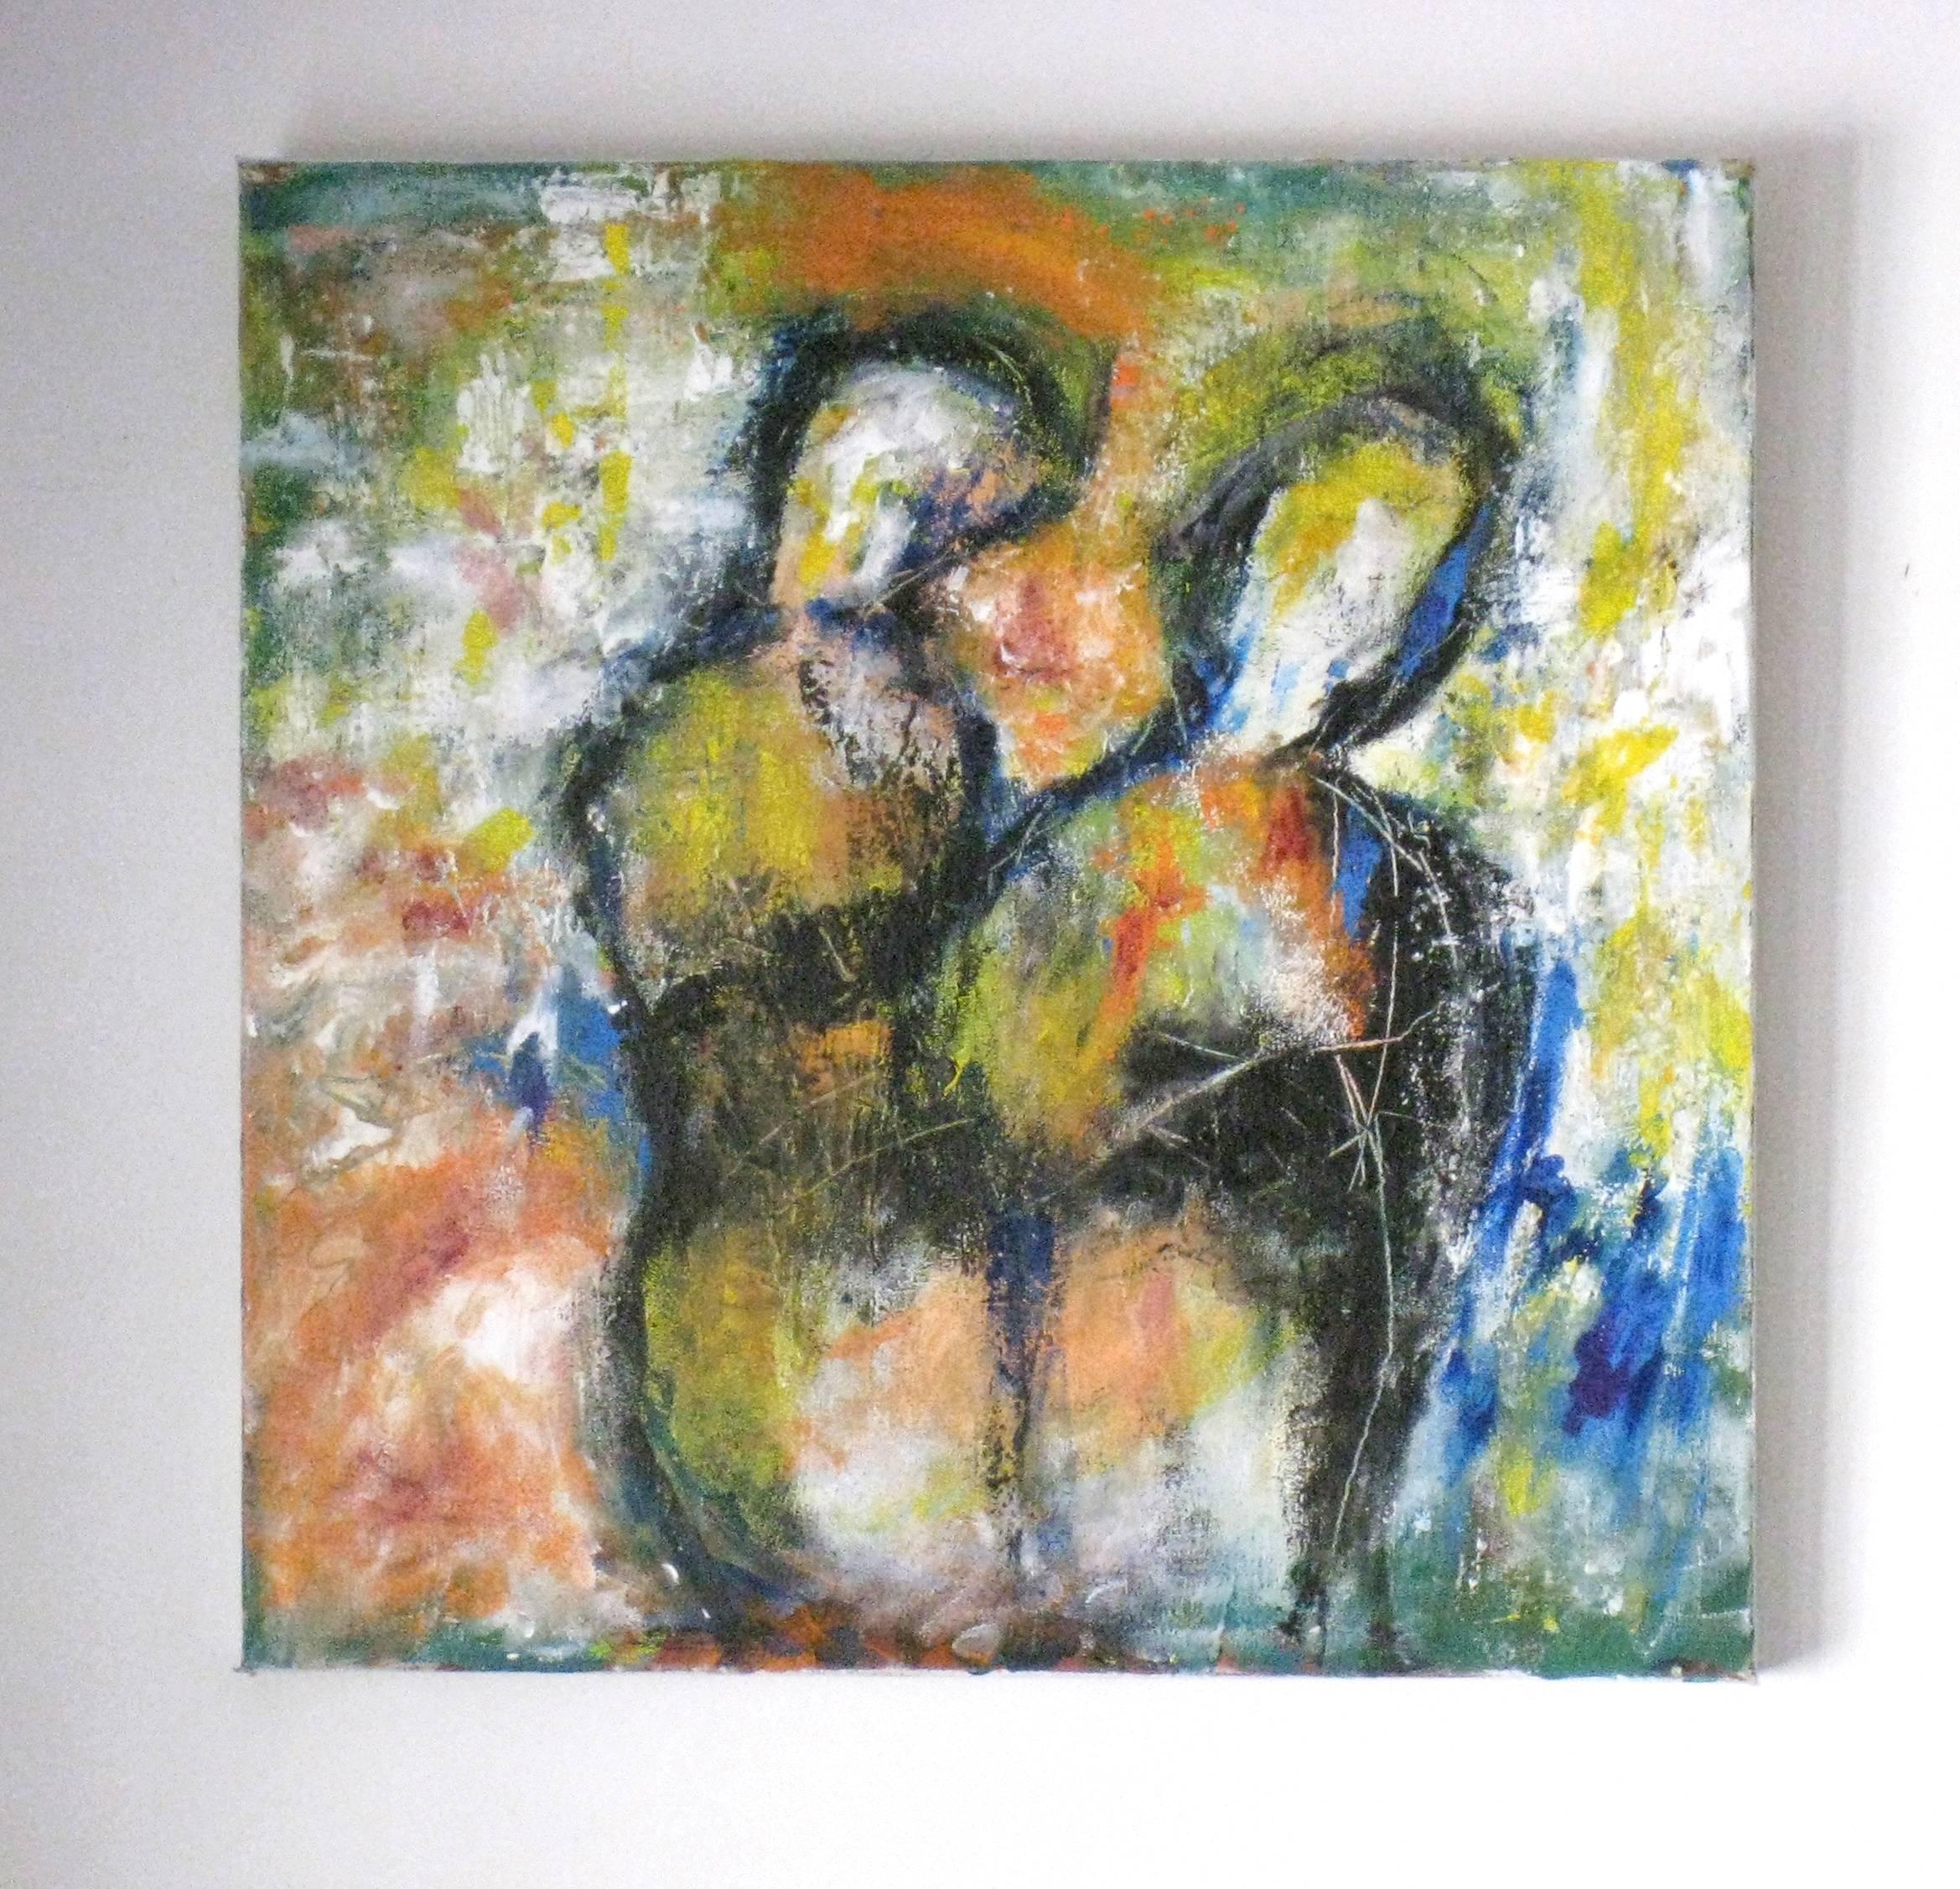 In Our House - Expressionist Painting by Ron Klotchman